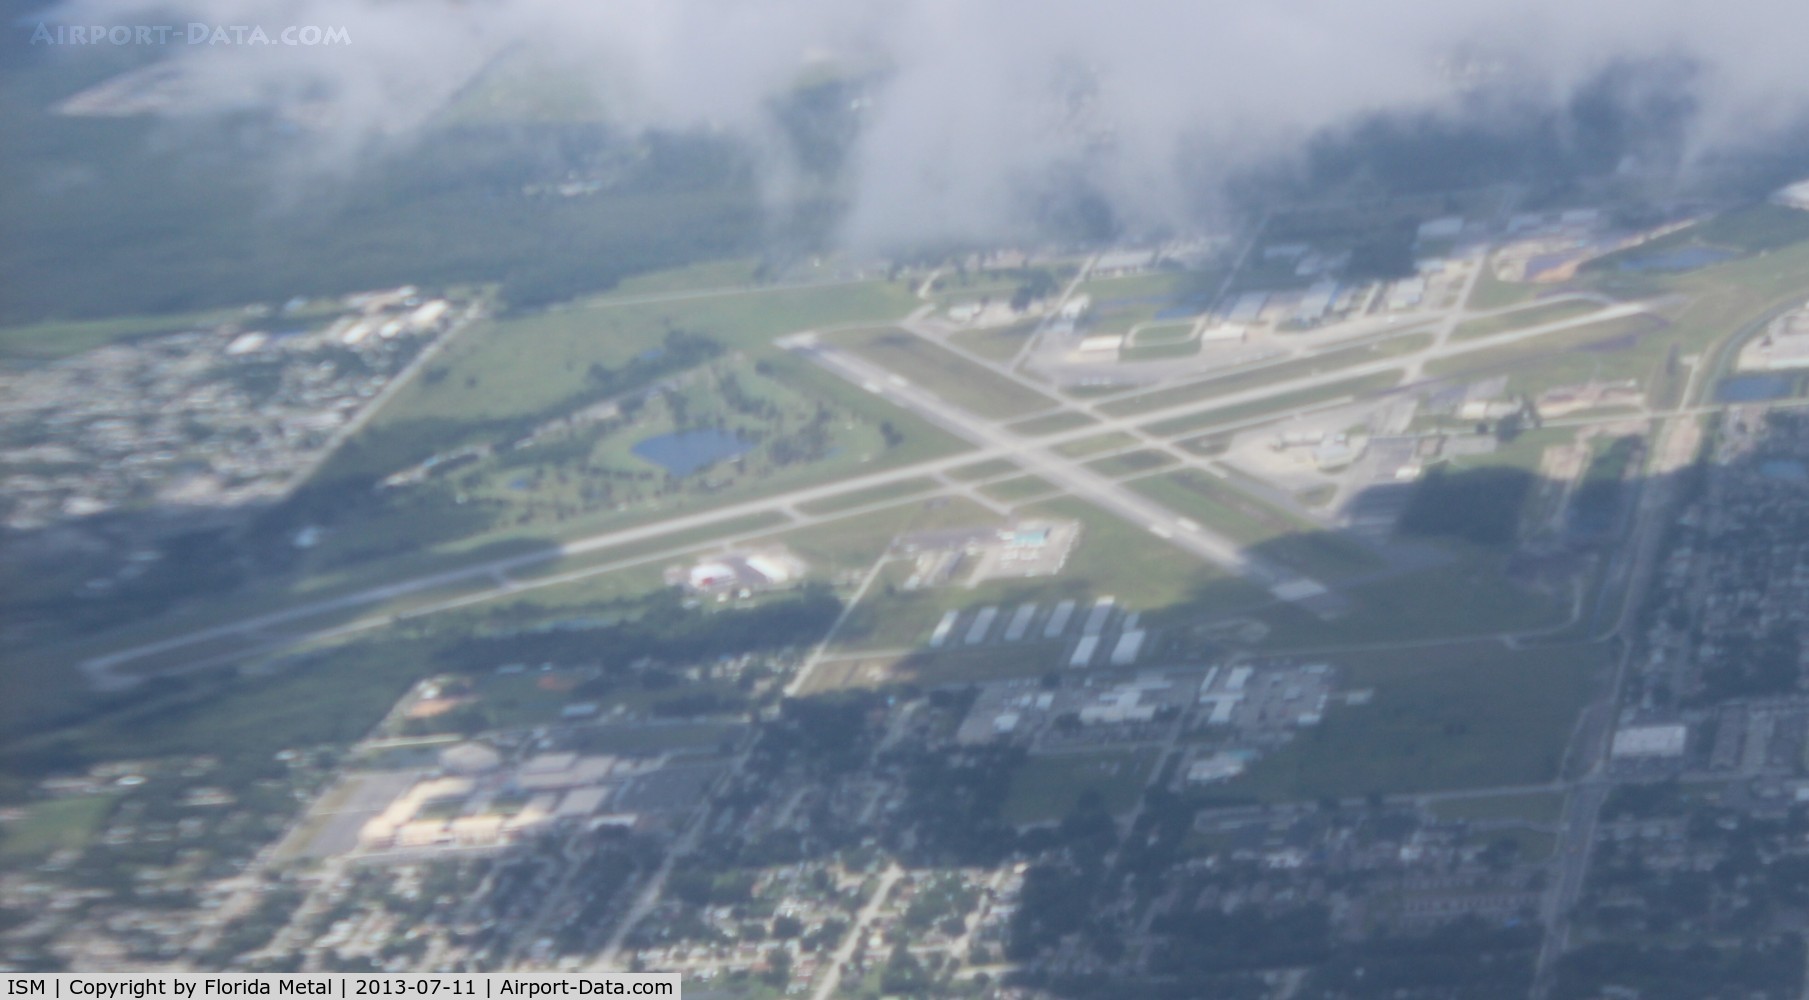 Kissimmee Gateway Airport (ISM) - On an Air Tran flight MCO-DTW, departing from MCO over Kissimmee Airport